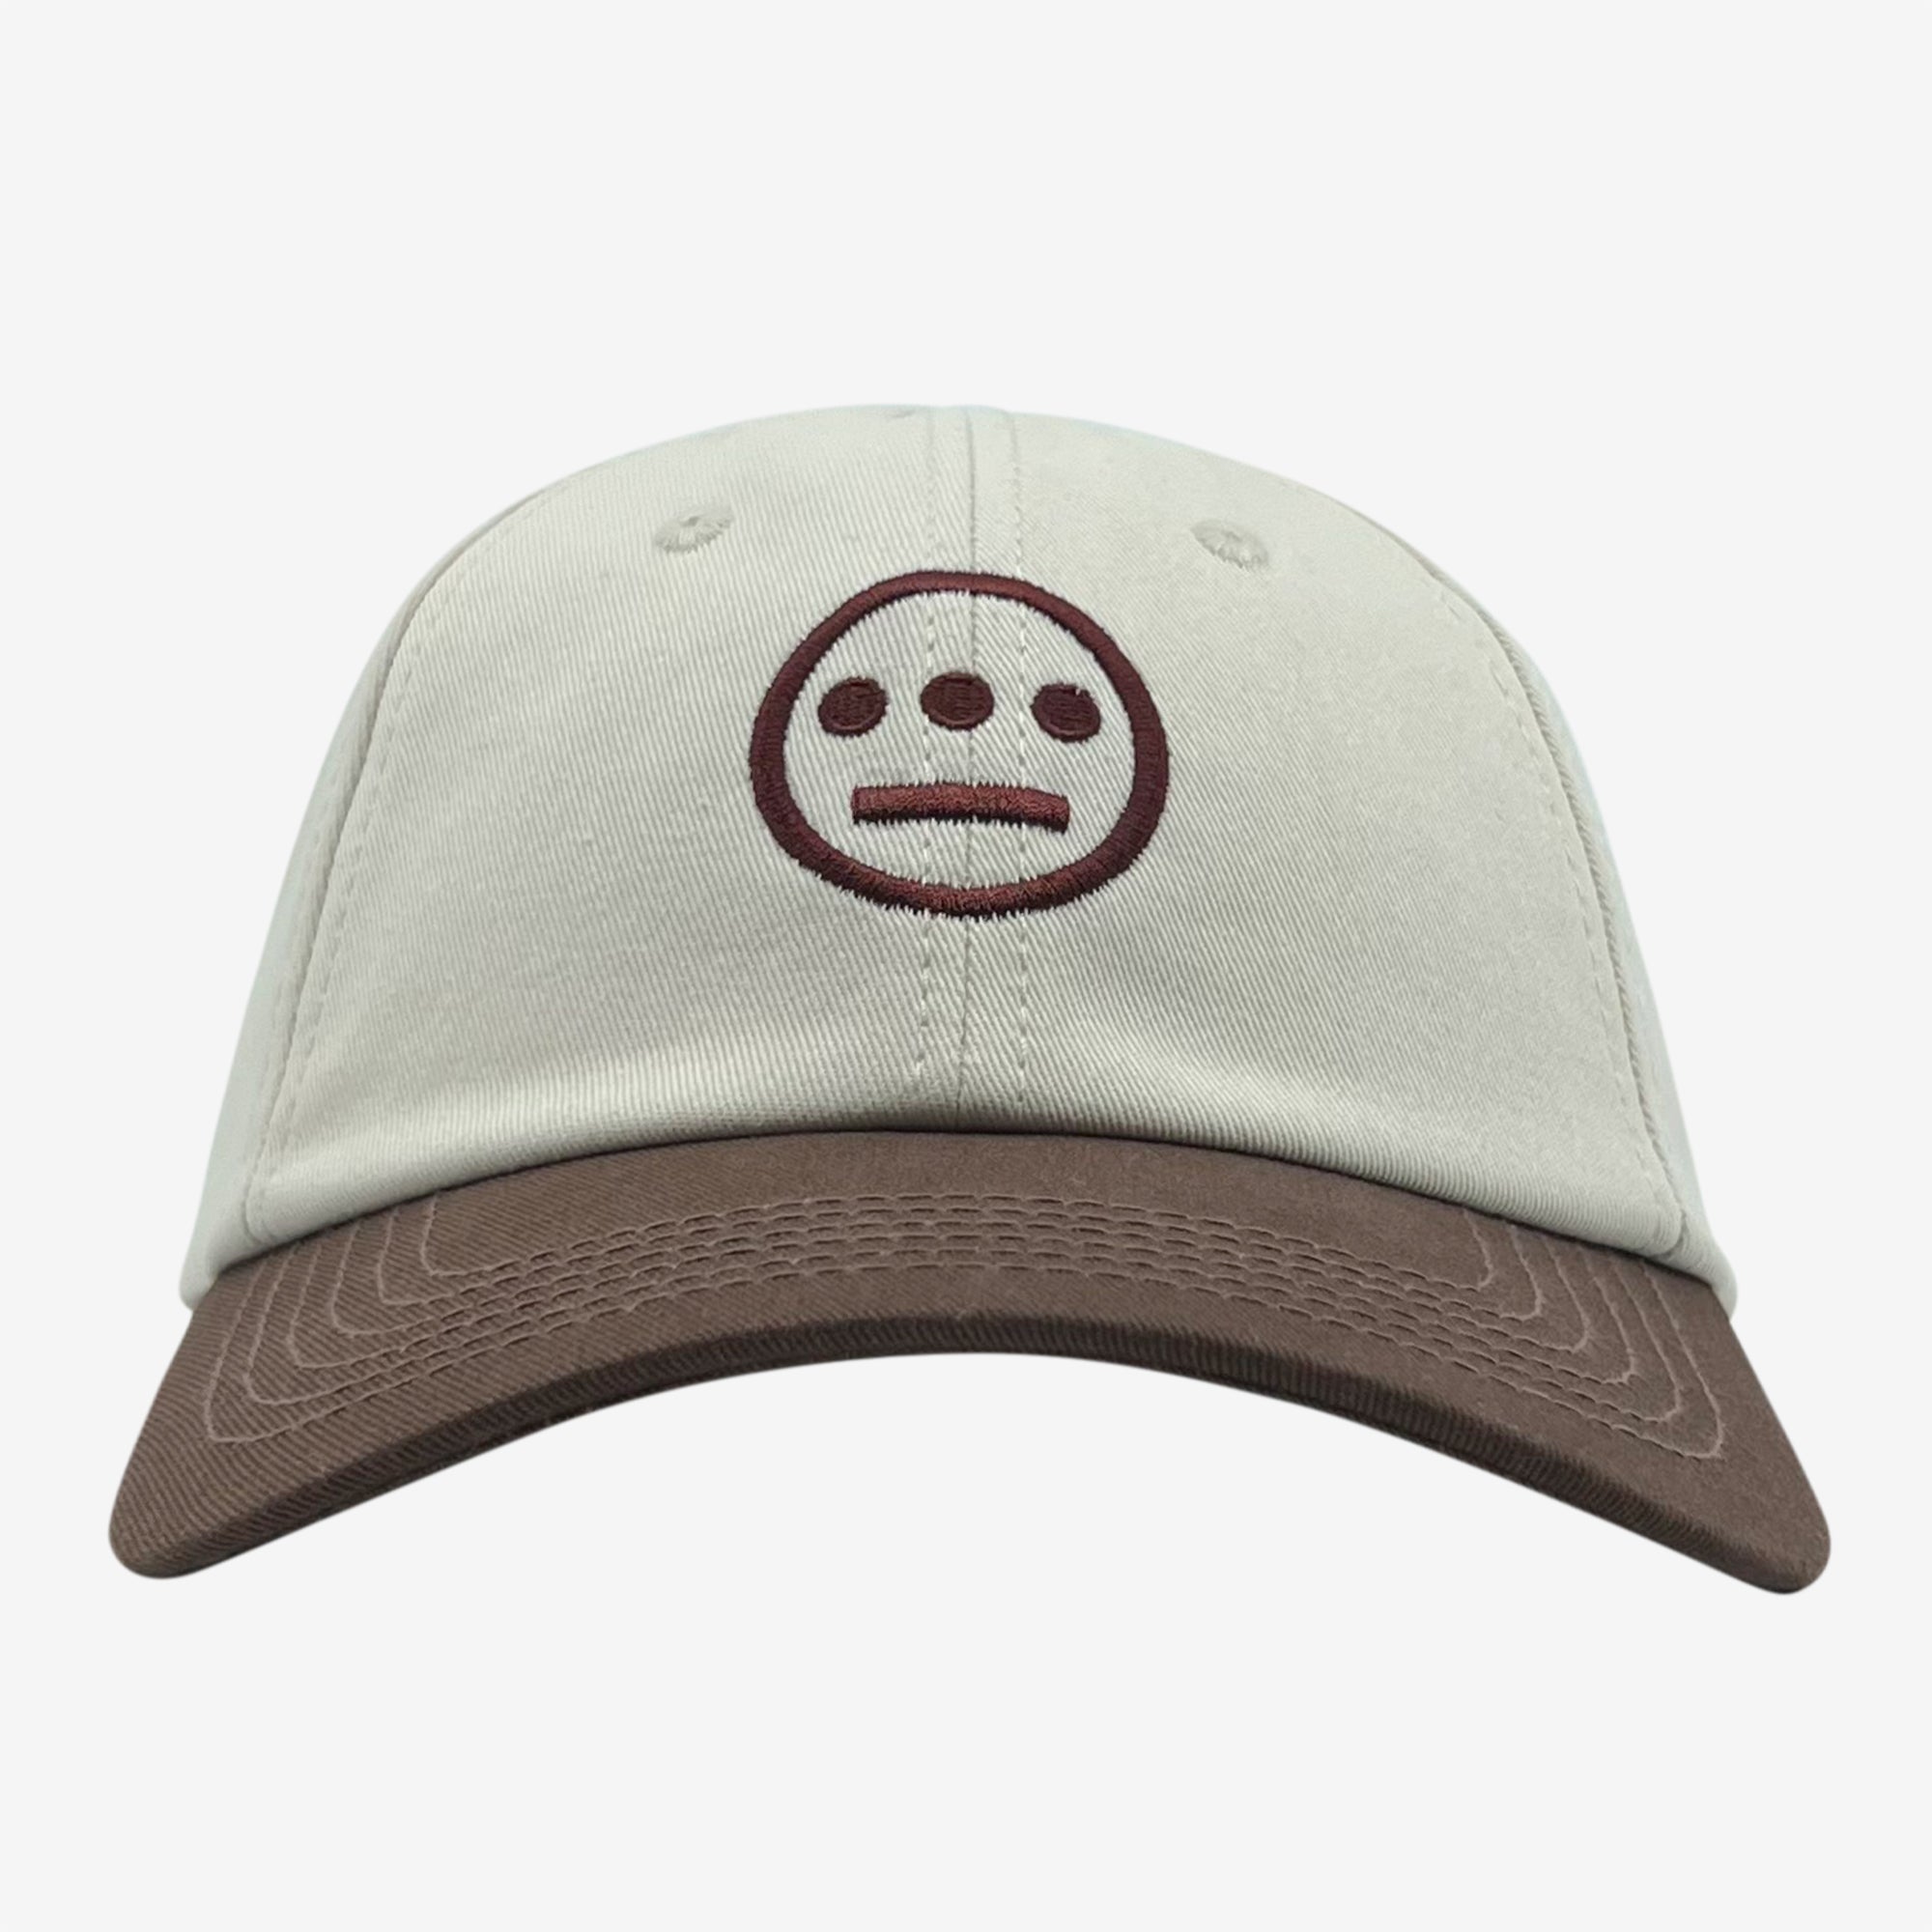 Cream dad hat with brown embroidered Hiero hip-hop crew logo on tan crown with a contrasting brown visor.